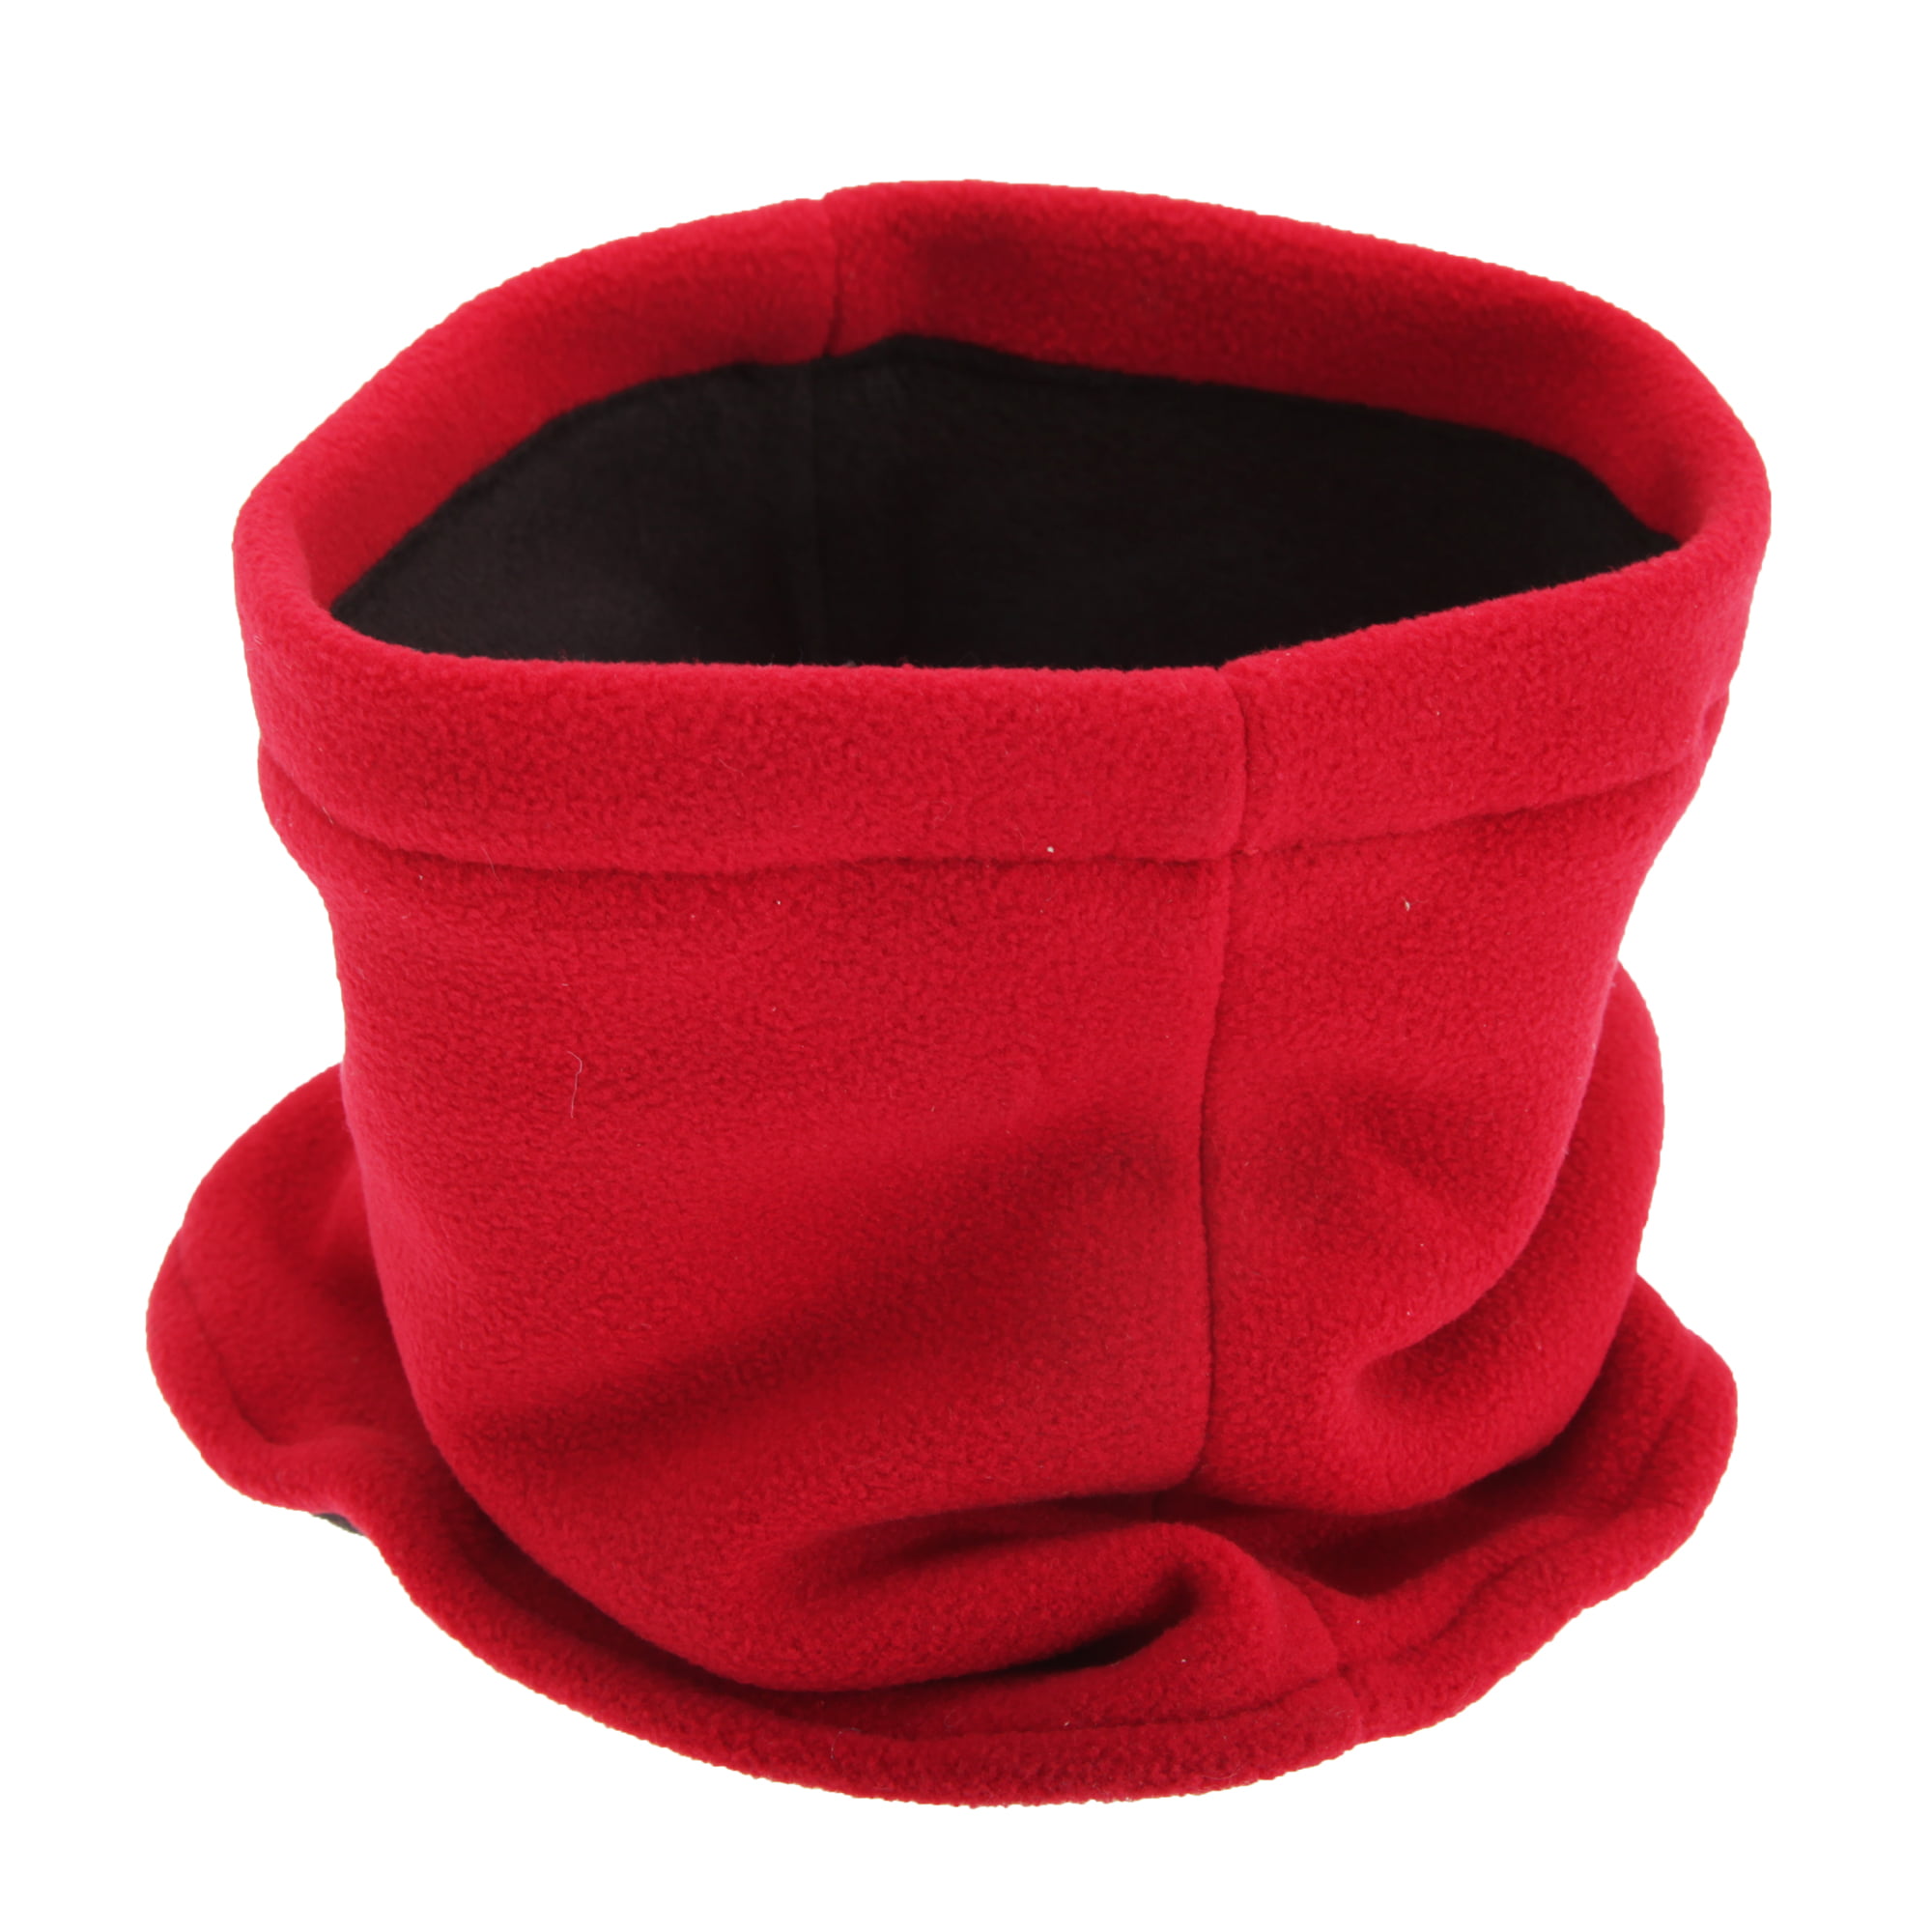 Fits kids More Colour options. Soft & Cozy Kids Boys Girls Warm Fleece Scarf/Snood Bandana Style teens and young adults 